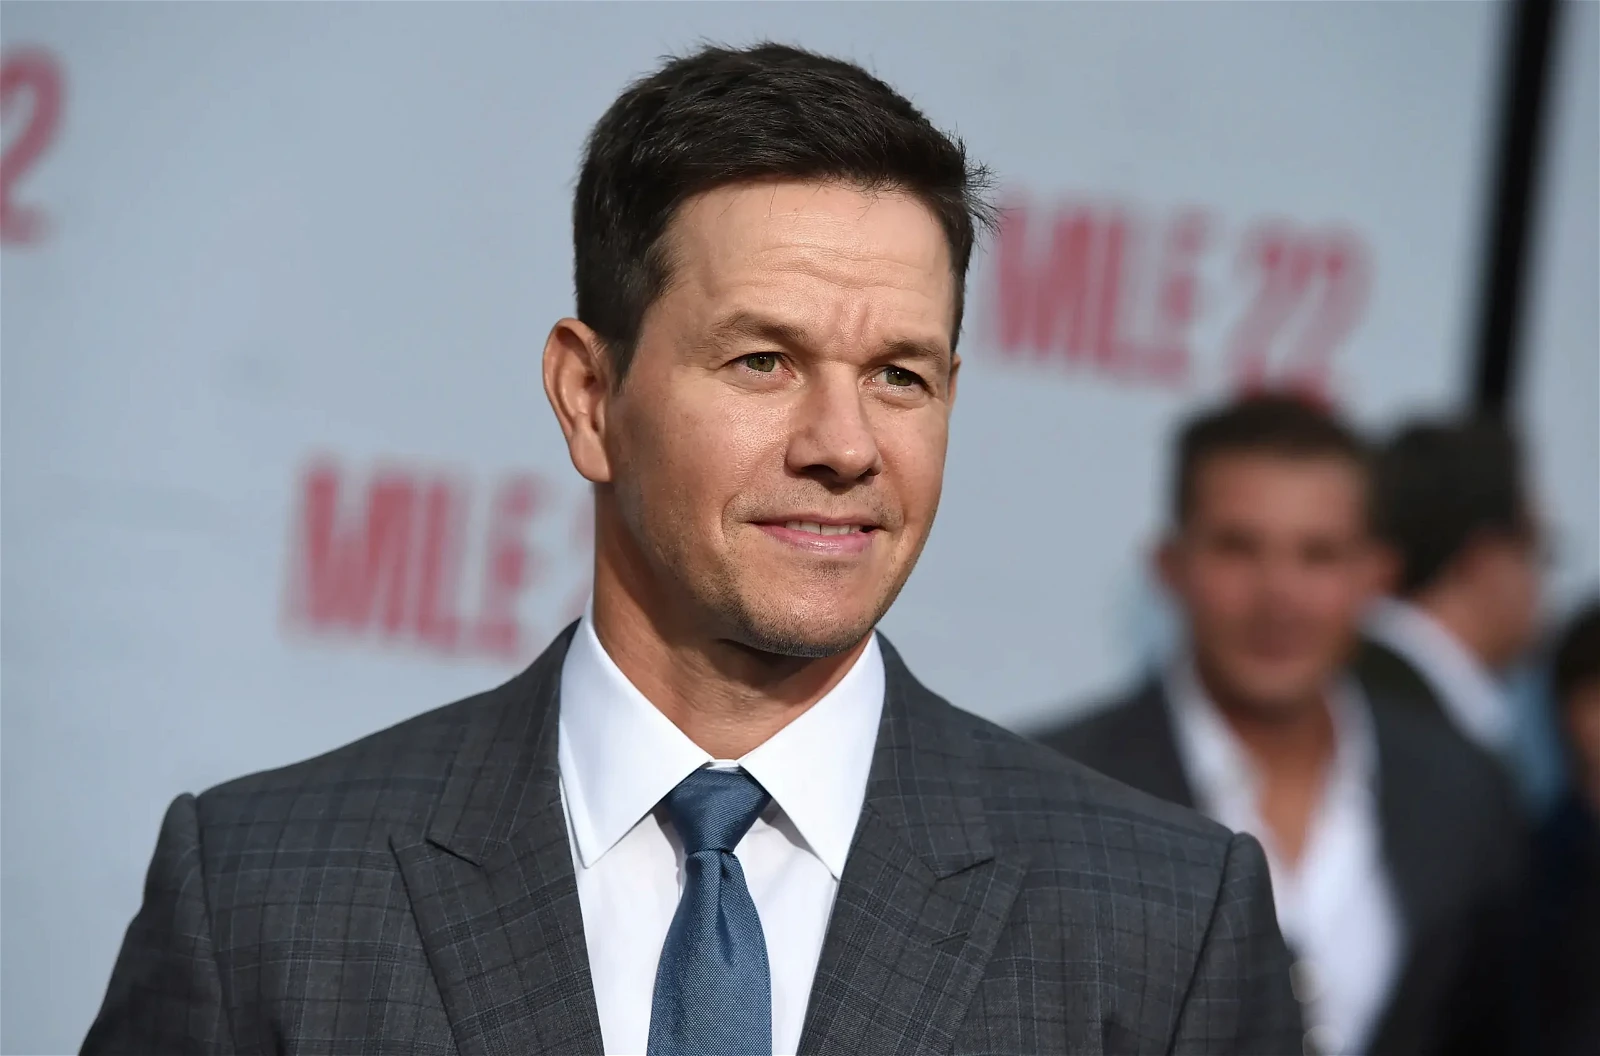 Mark Wahlberg had a different opinion than critics on the "Outstanding Achievement in Popular Film" Oscar